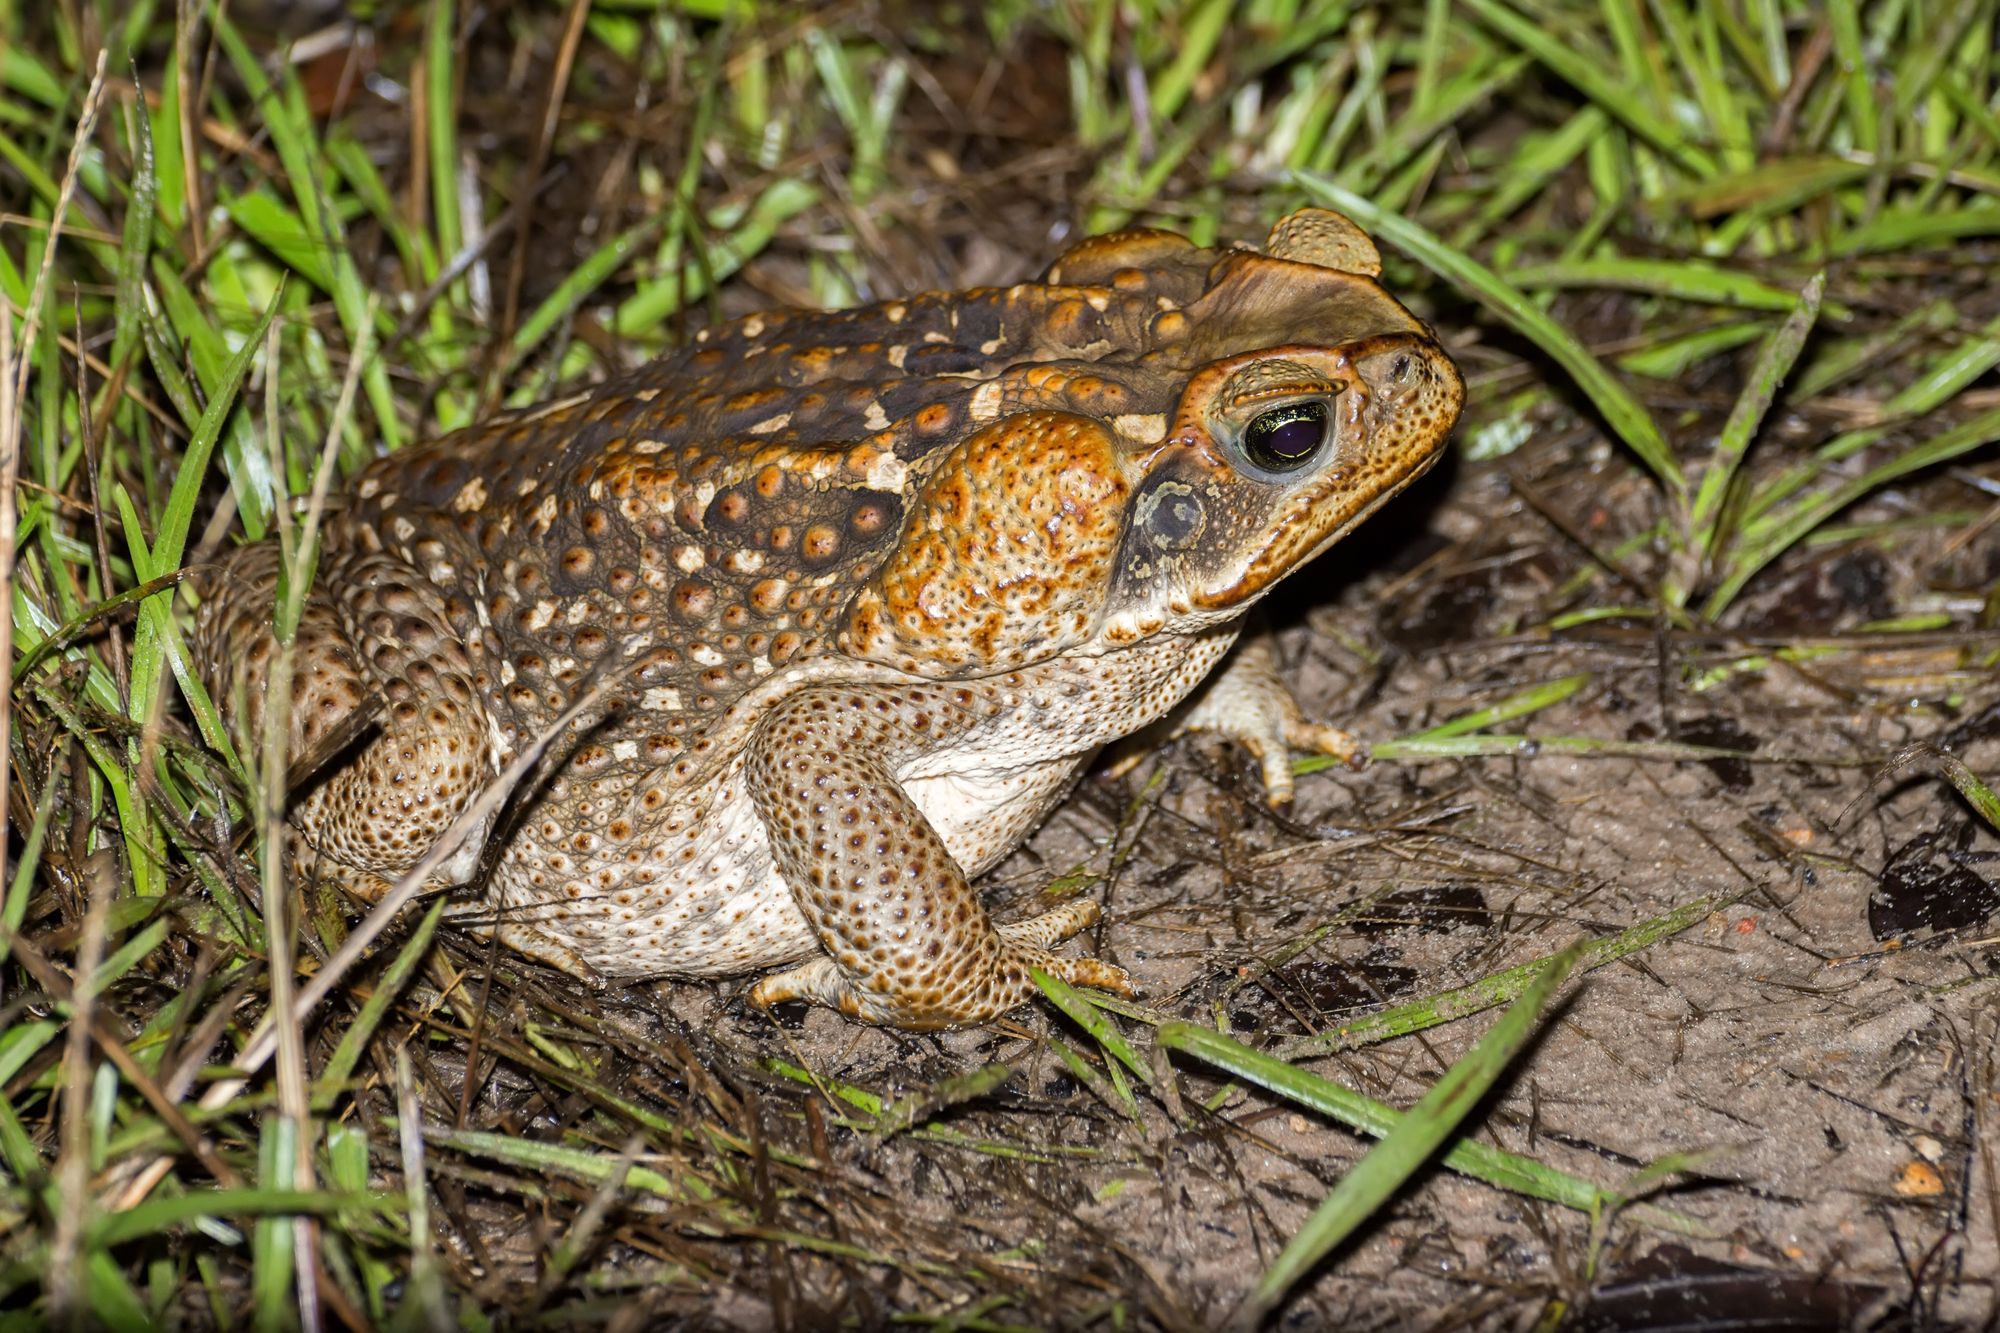 Cane Toad by Fernando Flores, Flickr